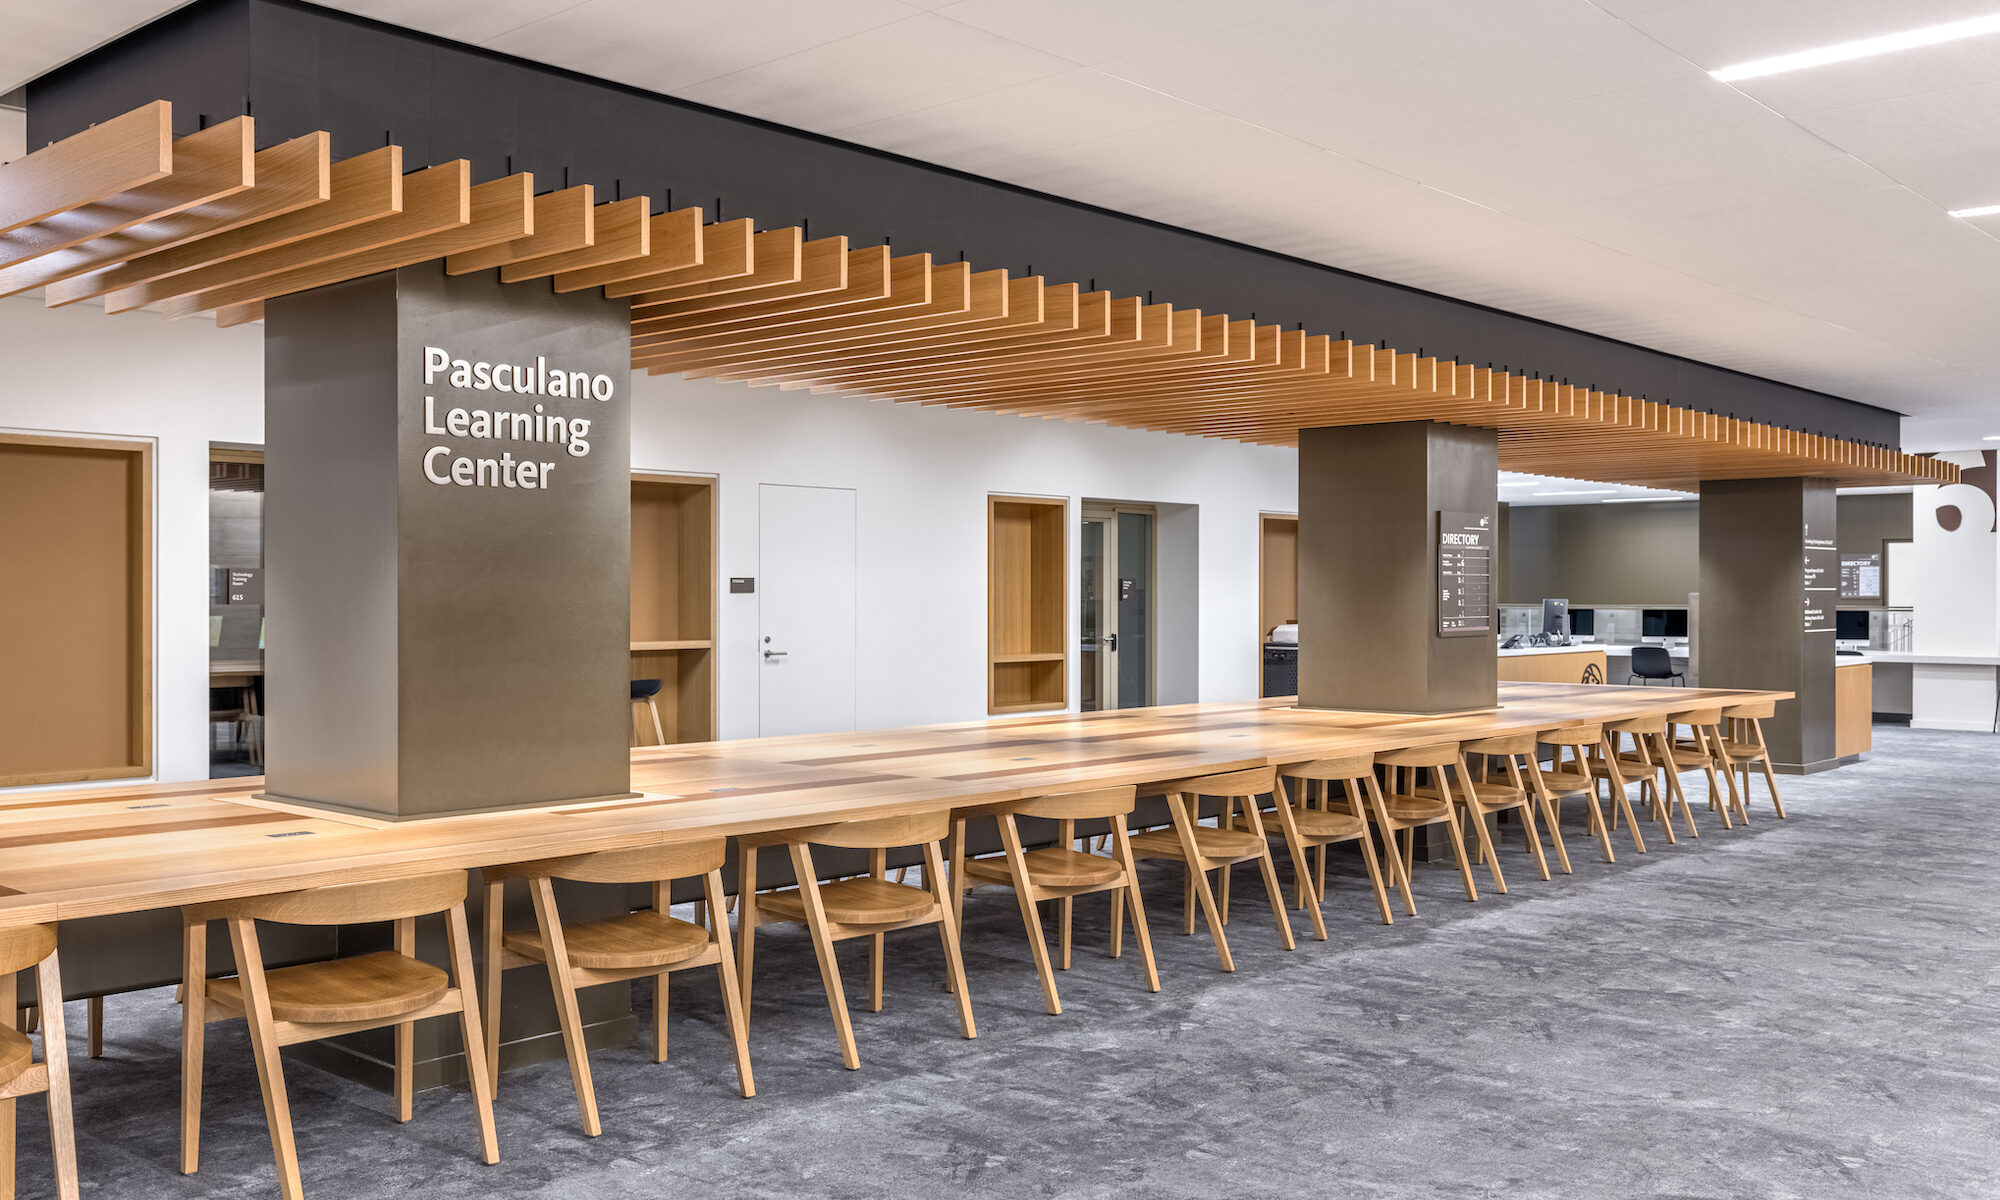 Photo of a long wooden table in the Pasculano Learning Center inside of the Stavros Niarchos Foundation Library (SNFL)